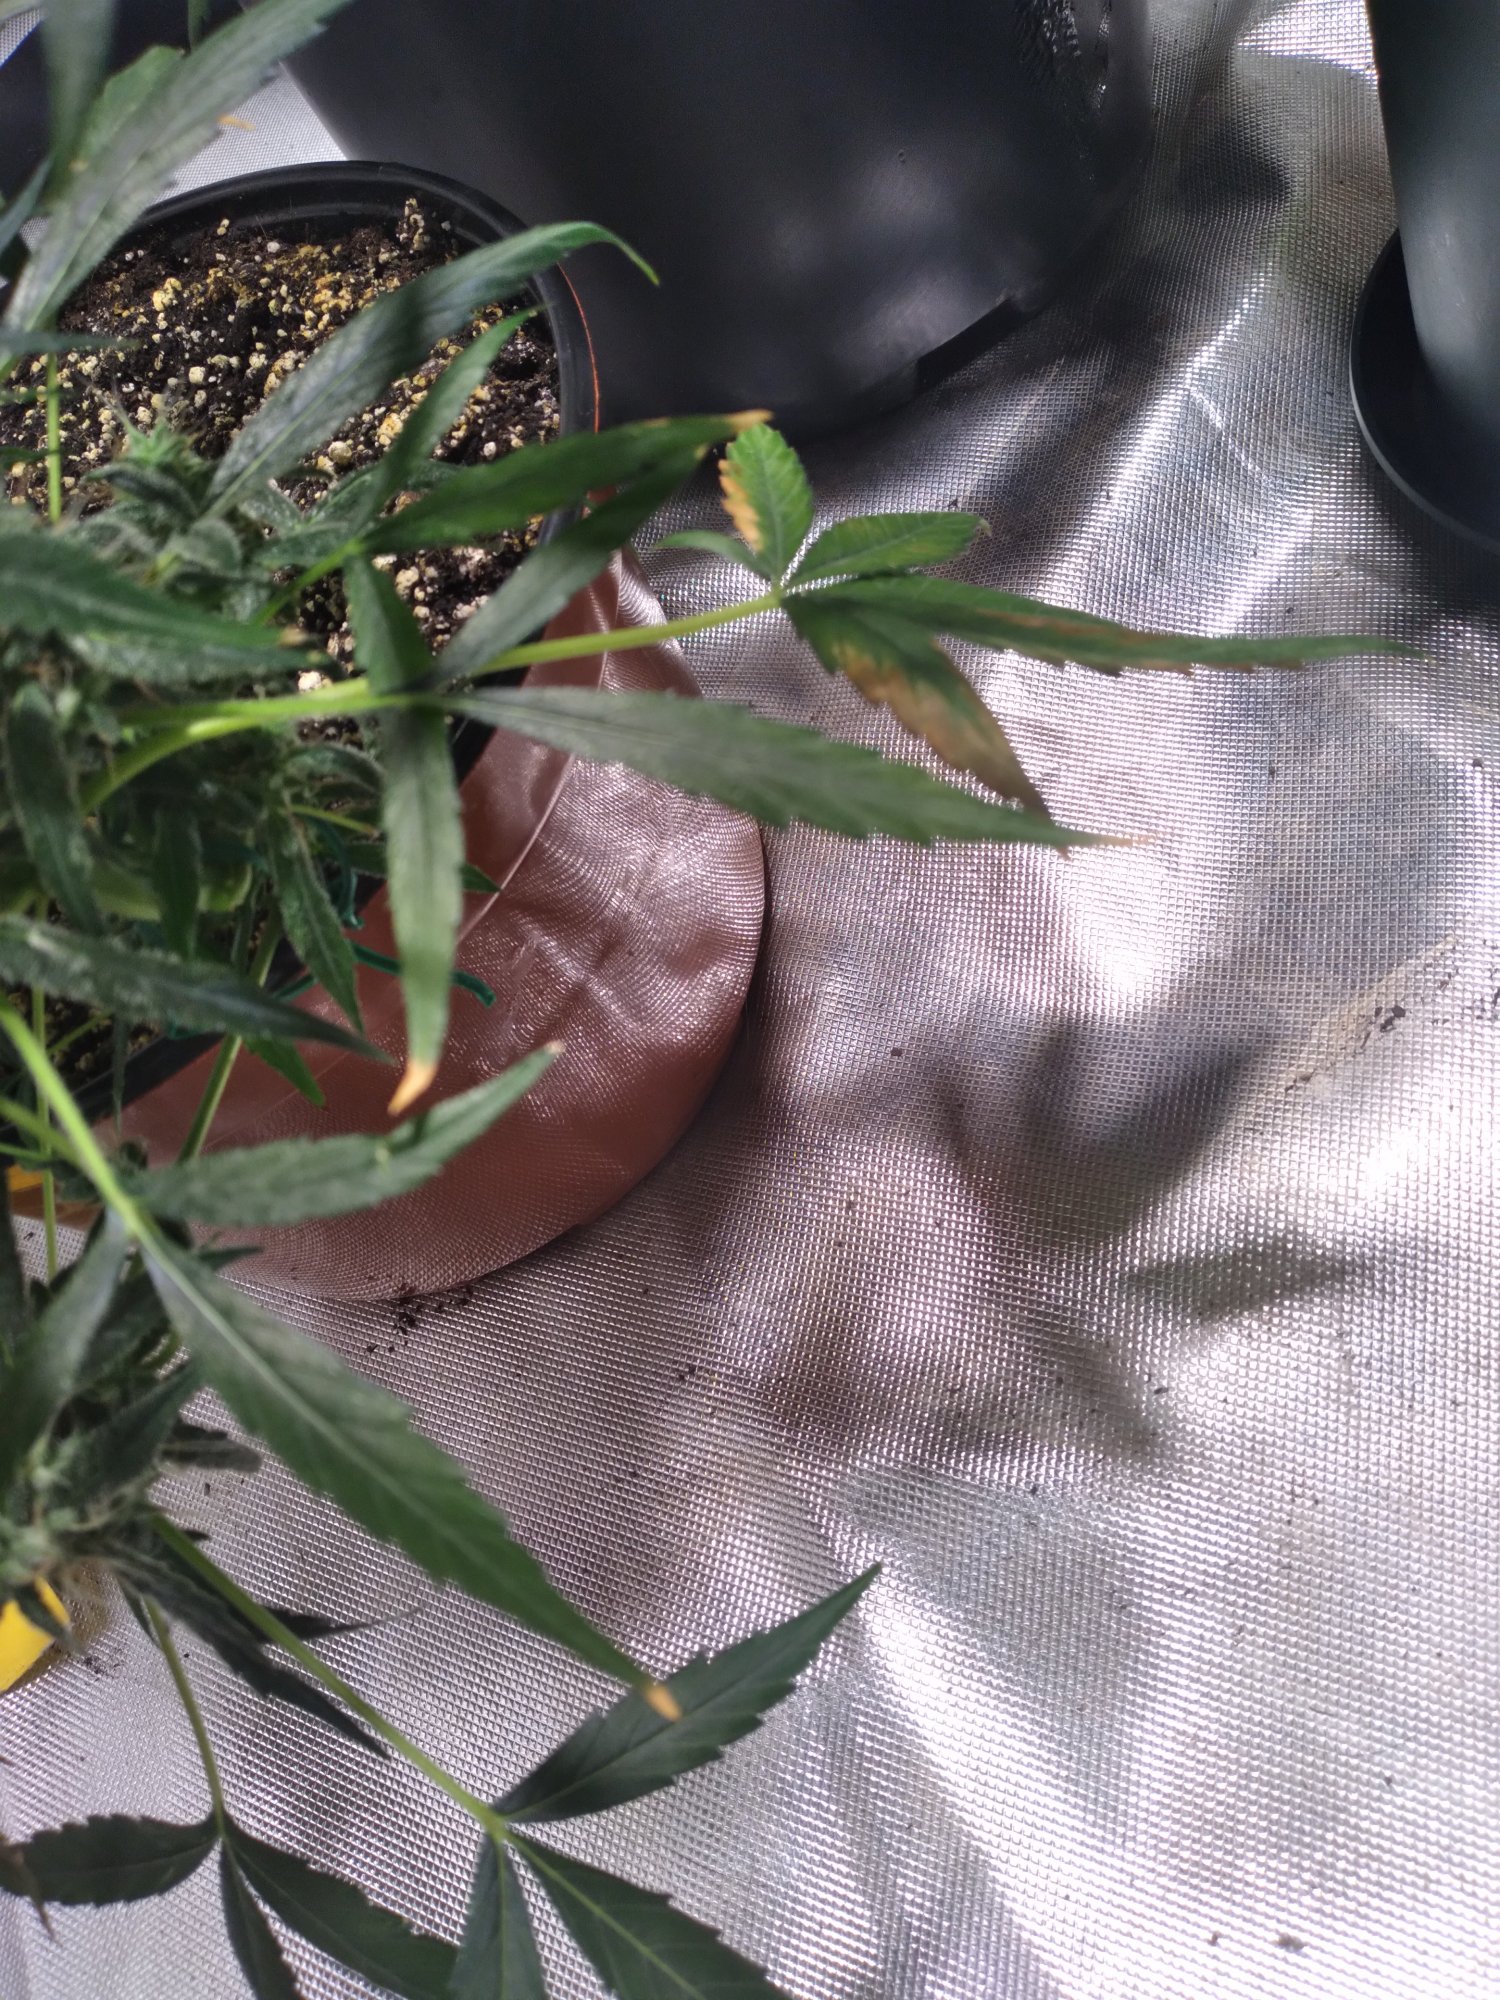 Got some problemsbrown leaves during flower 4